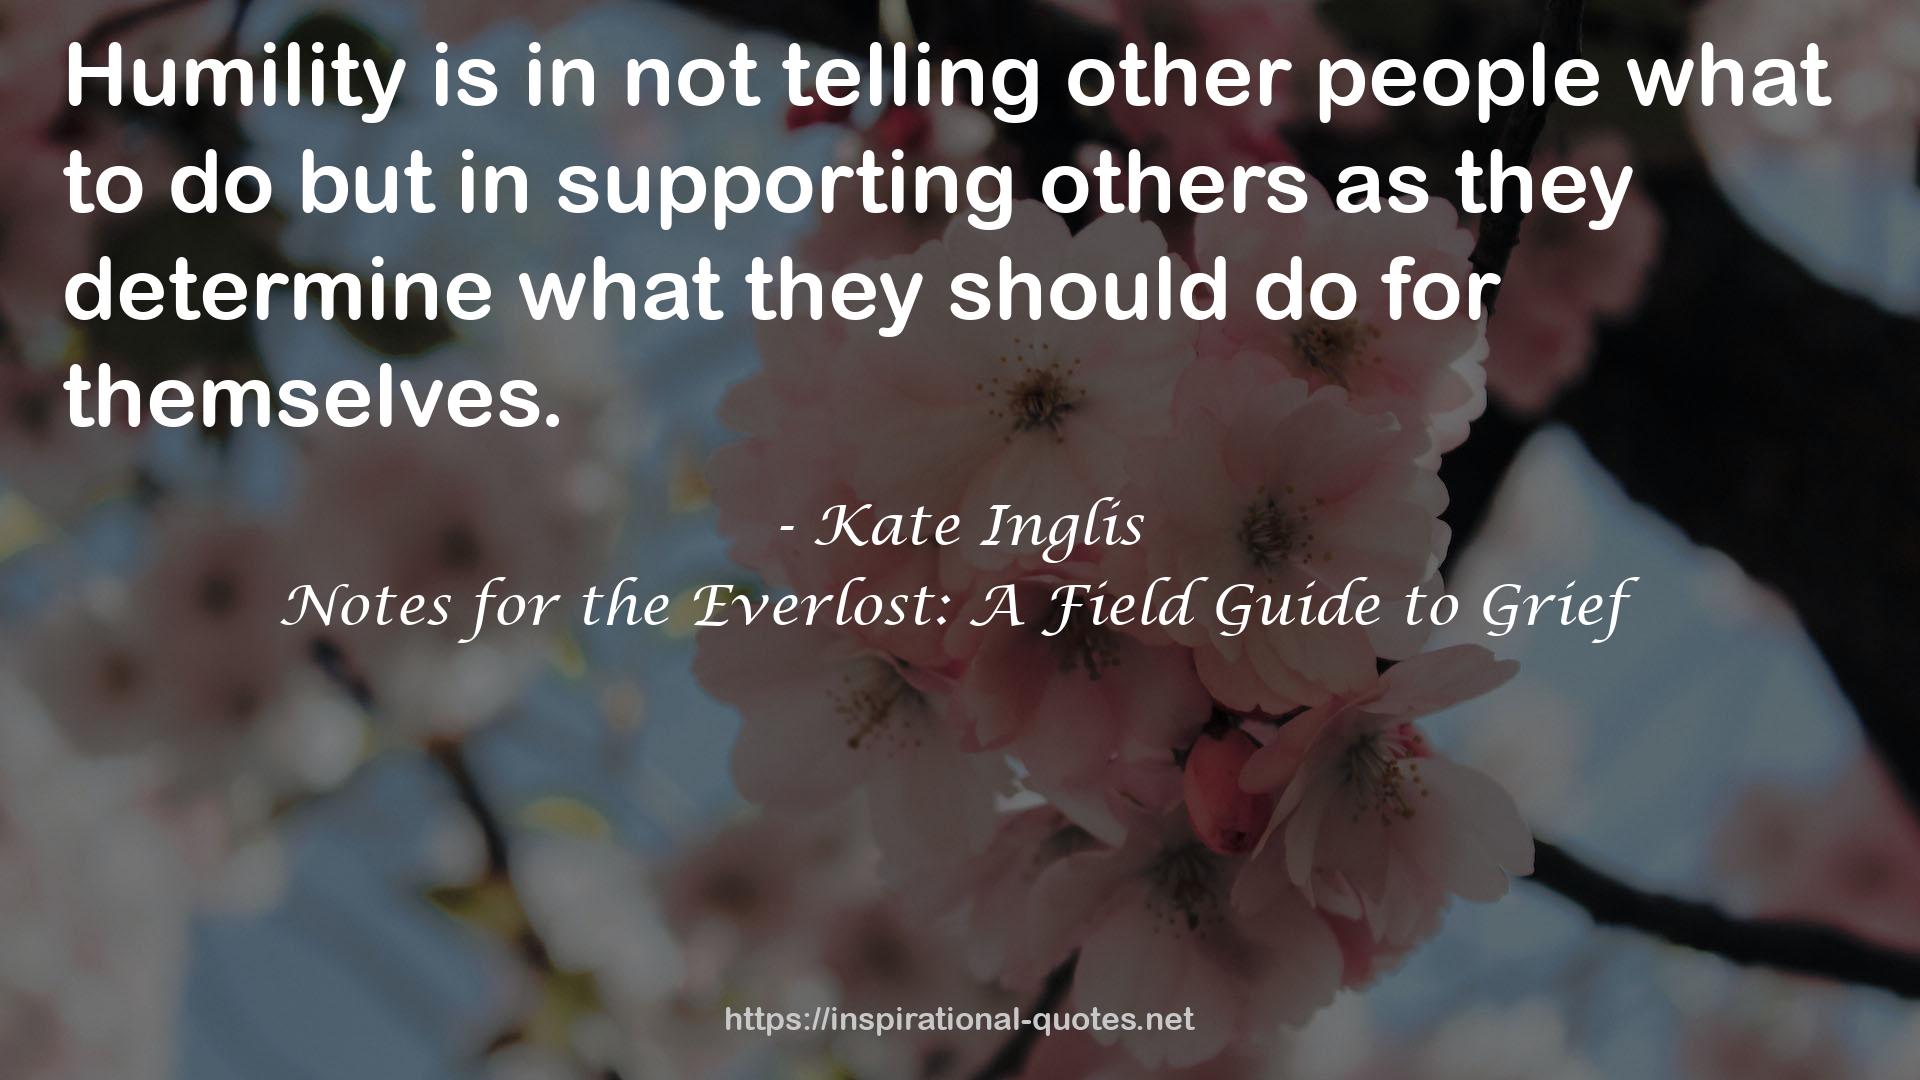 Notes for the Everlost: A Field Guide to Grief QUOTES